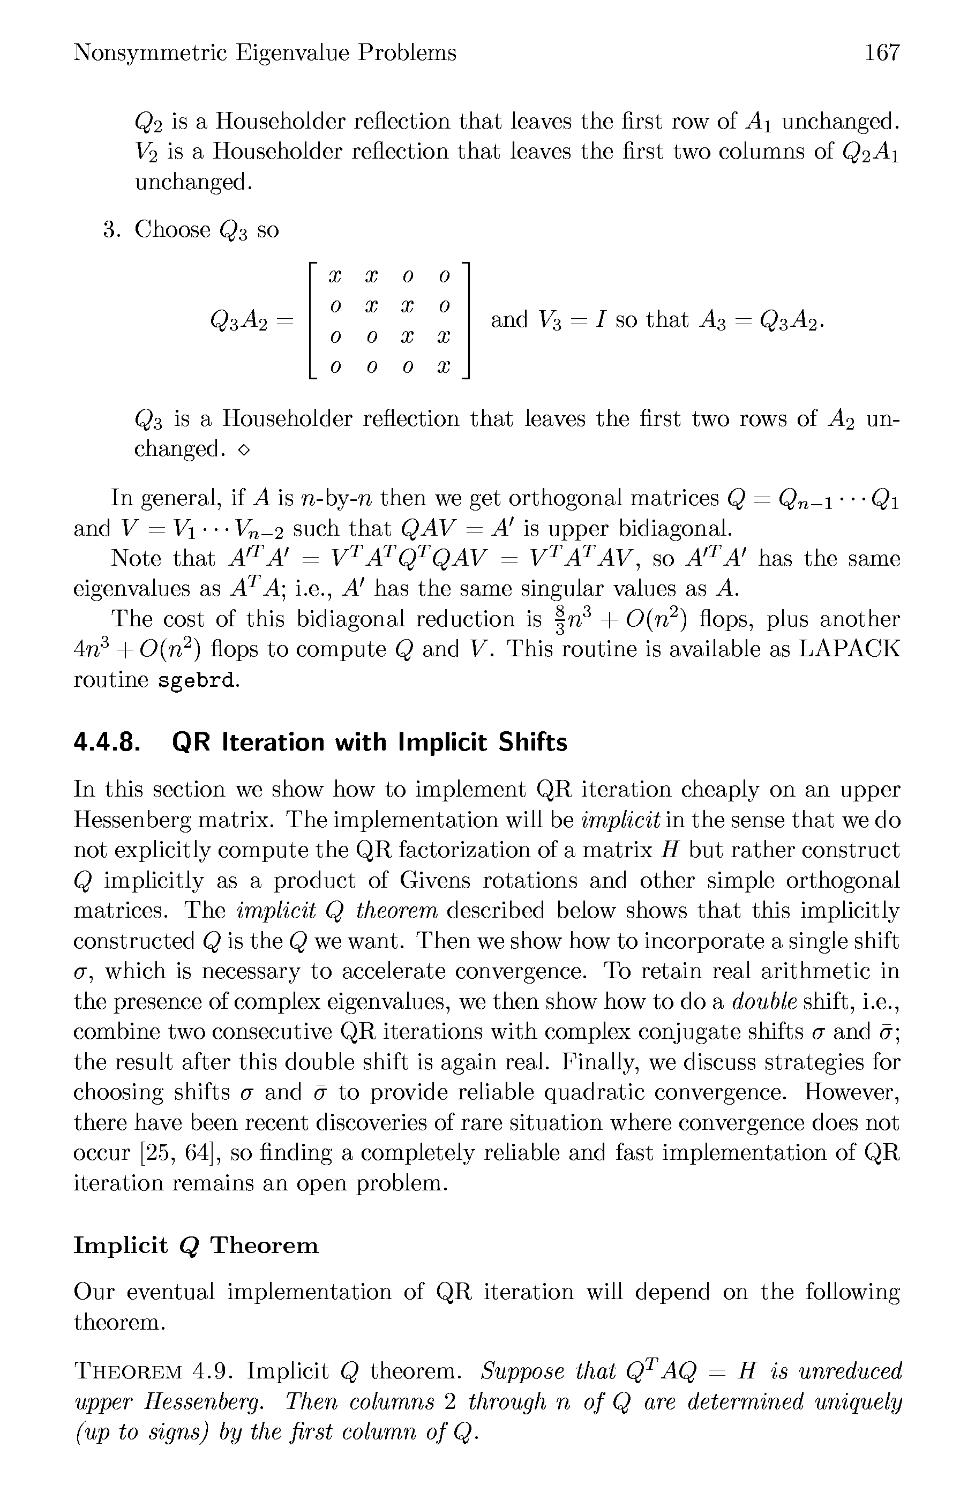 4.4.8 QR Iteration with Implicit Shifts